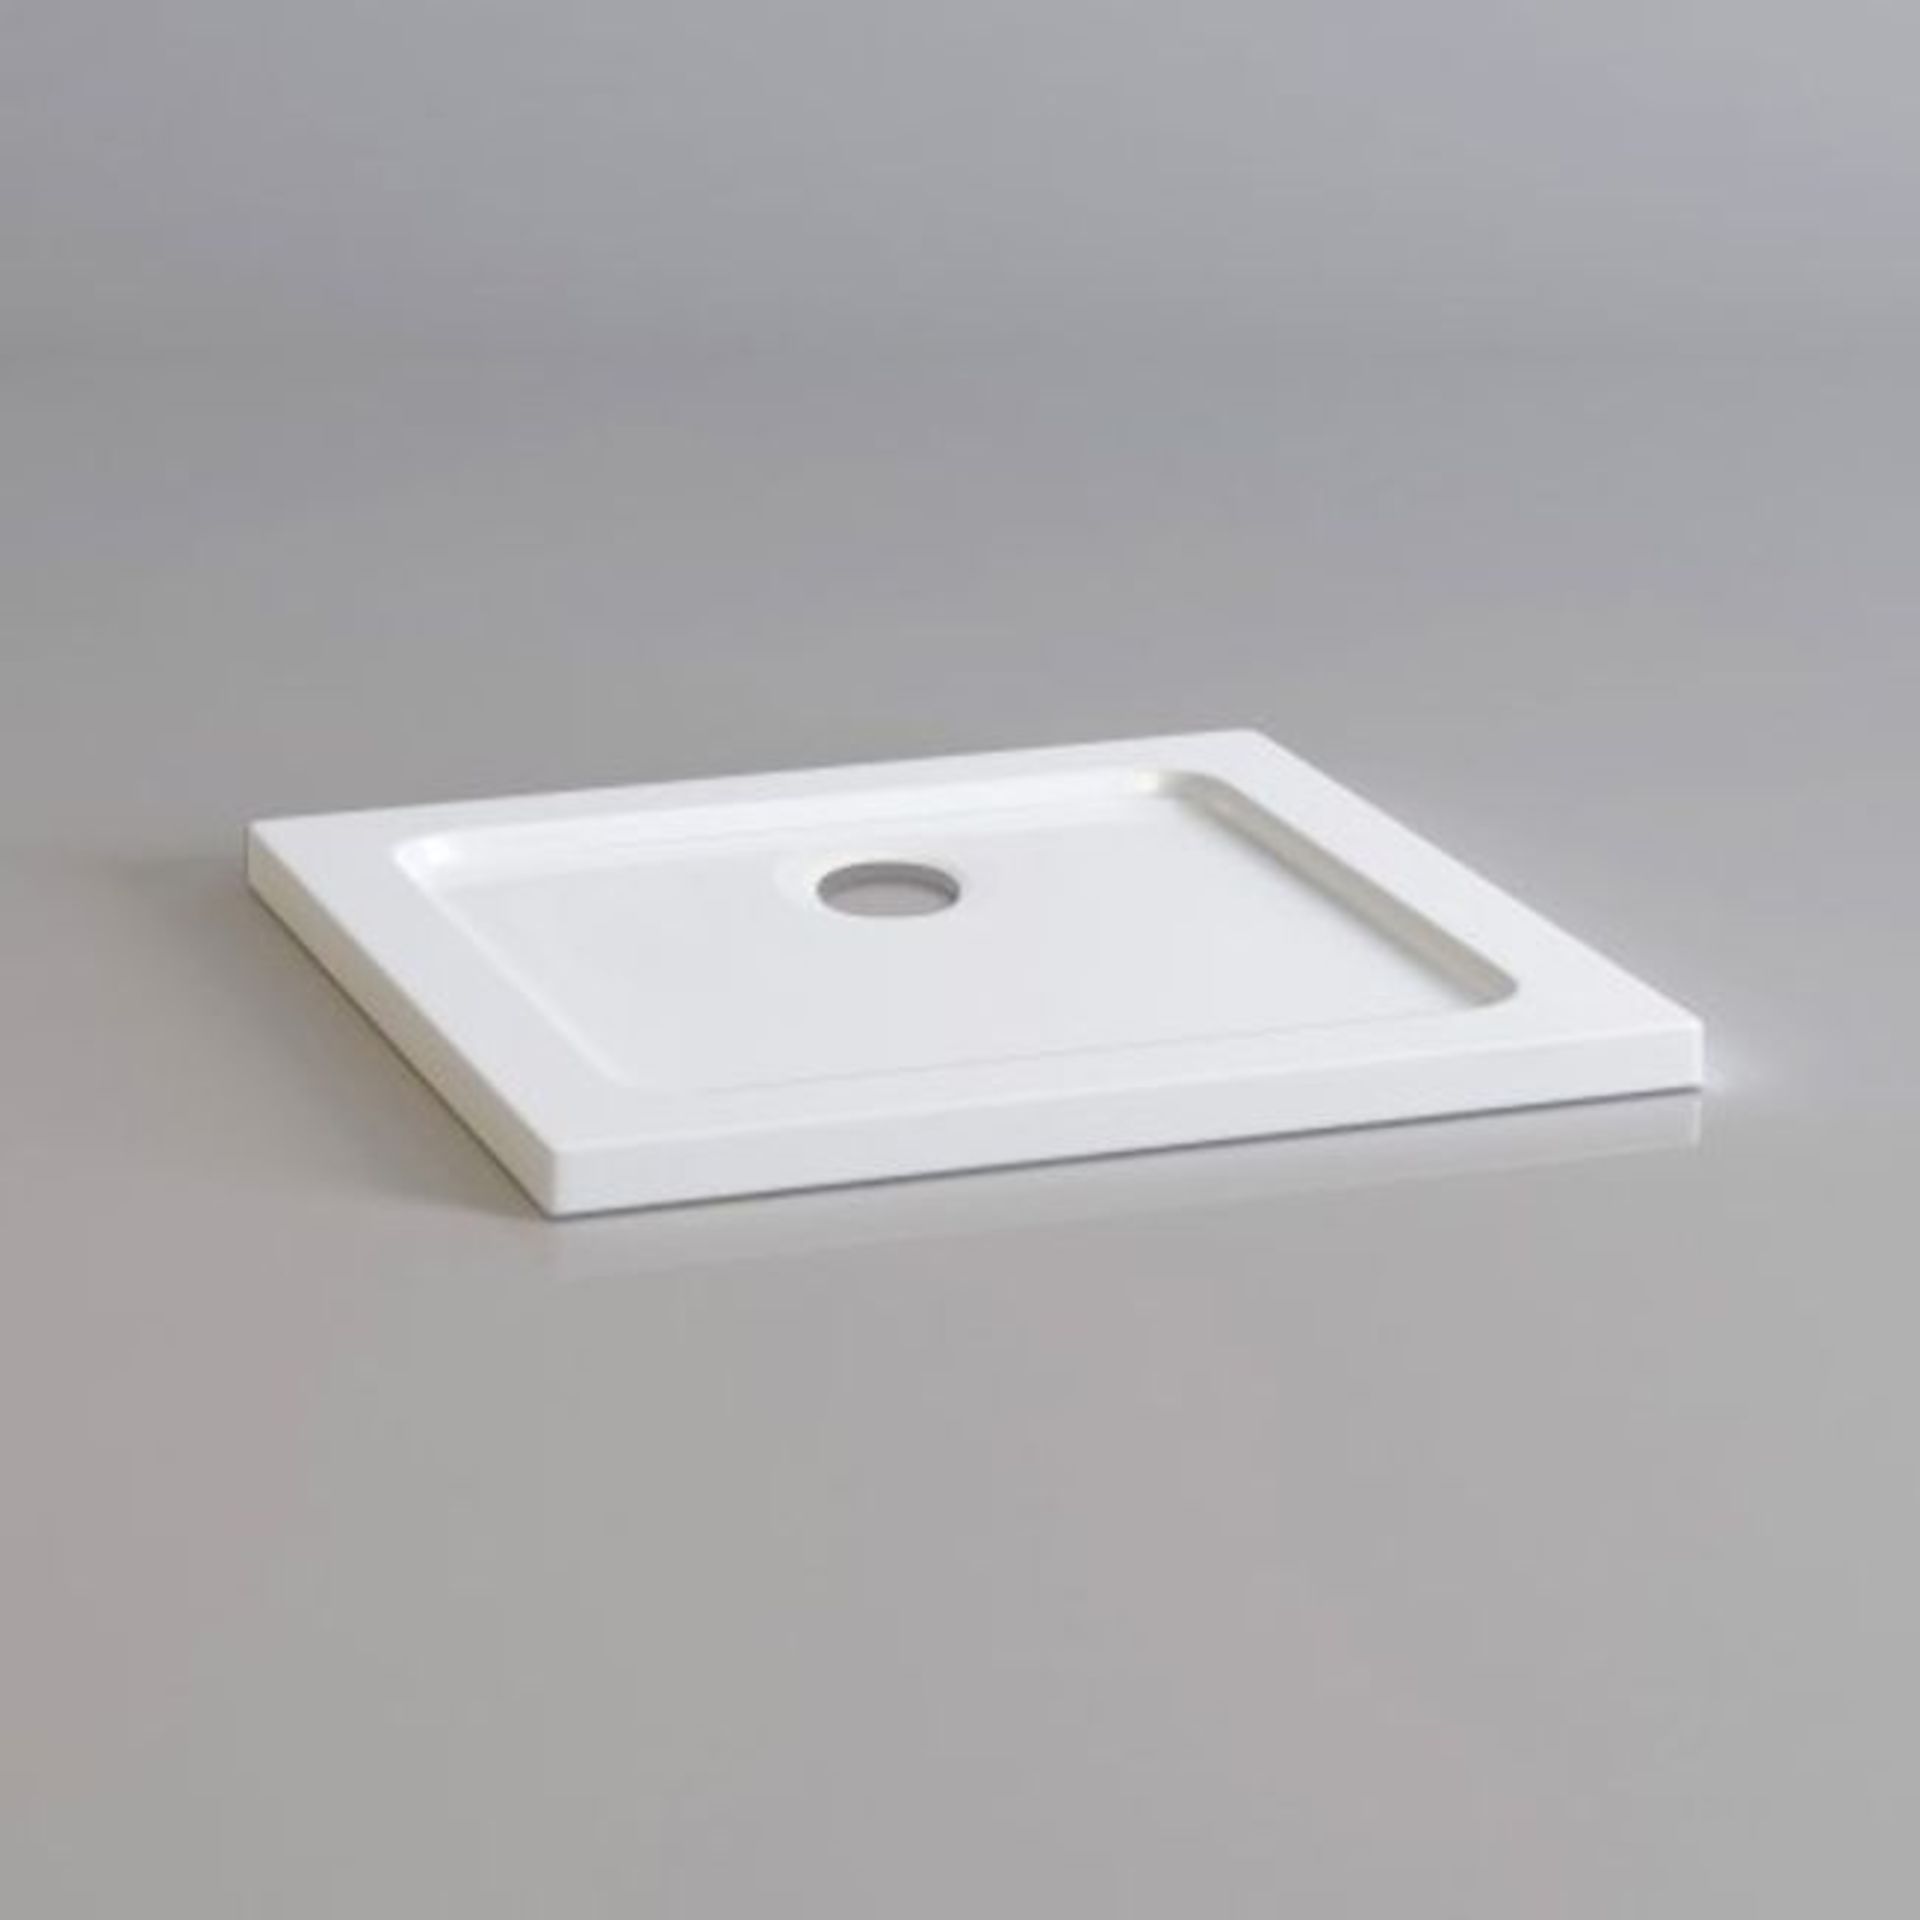 NEW 900x900mm Square Ultra Slim Stone Shower Tray. RRP £249.99.Designed and made carefully to... - Image 2 of 2